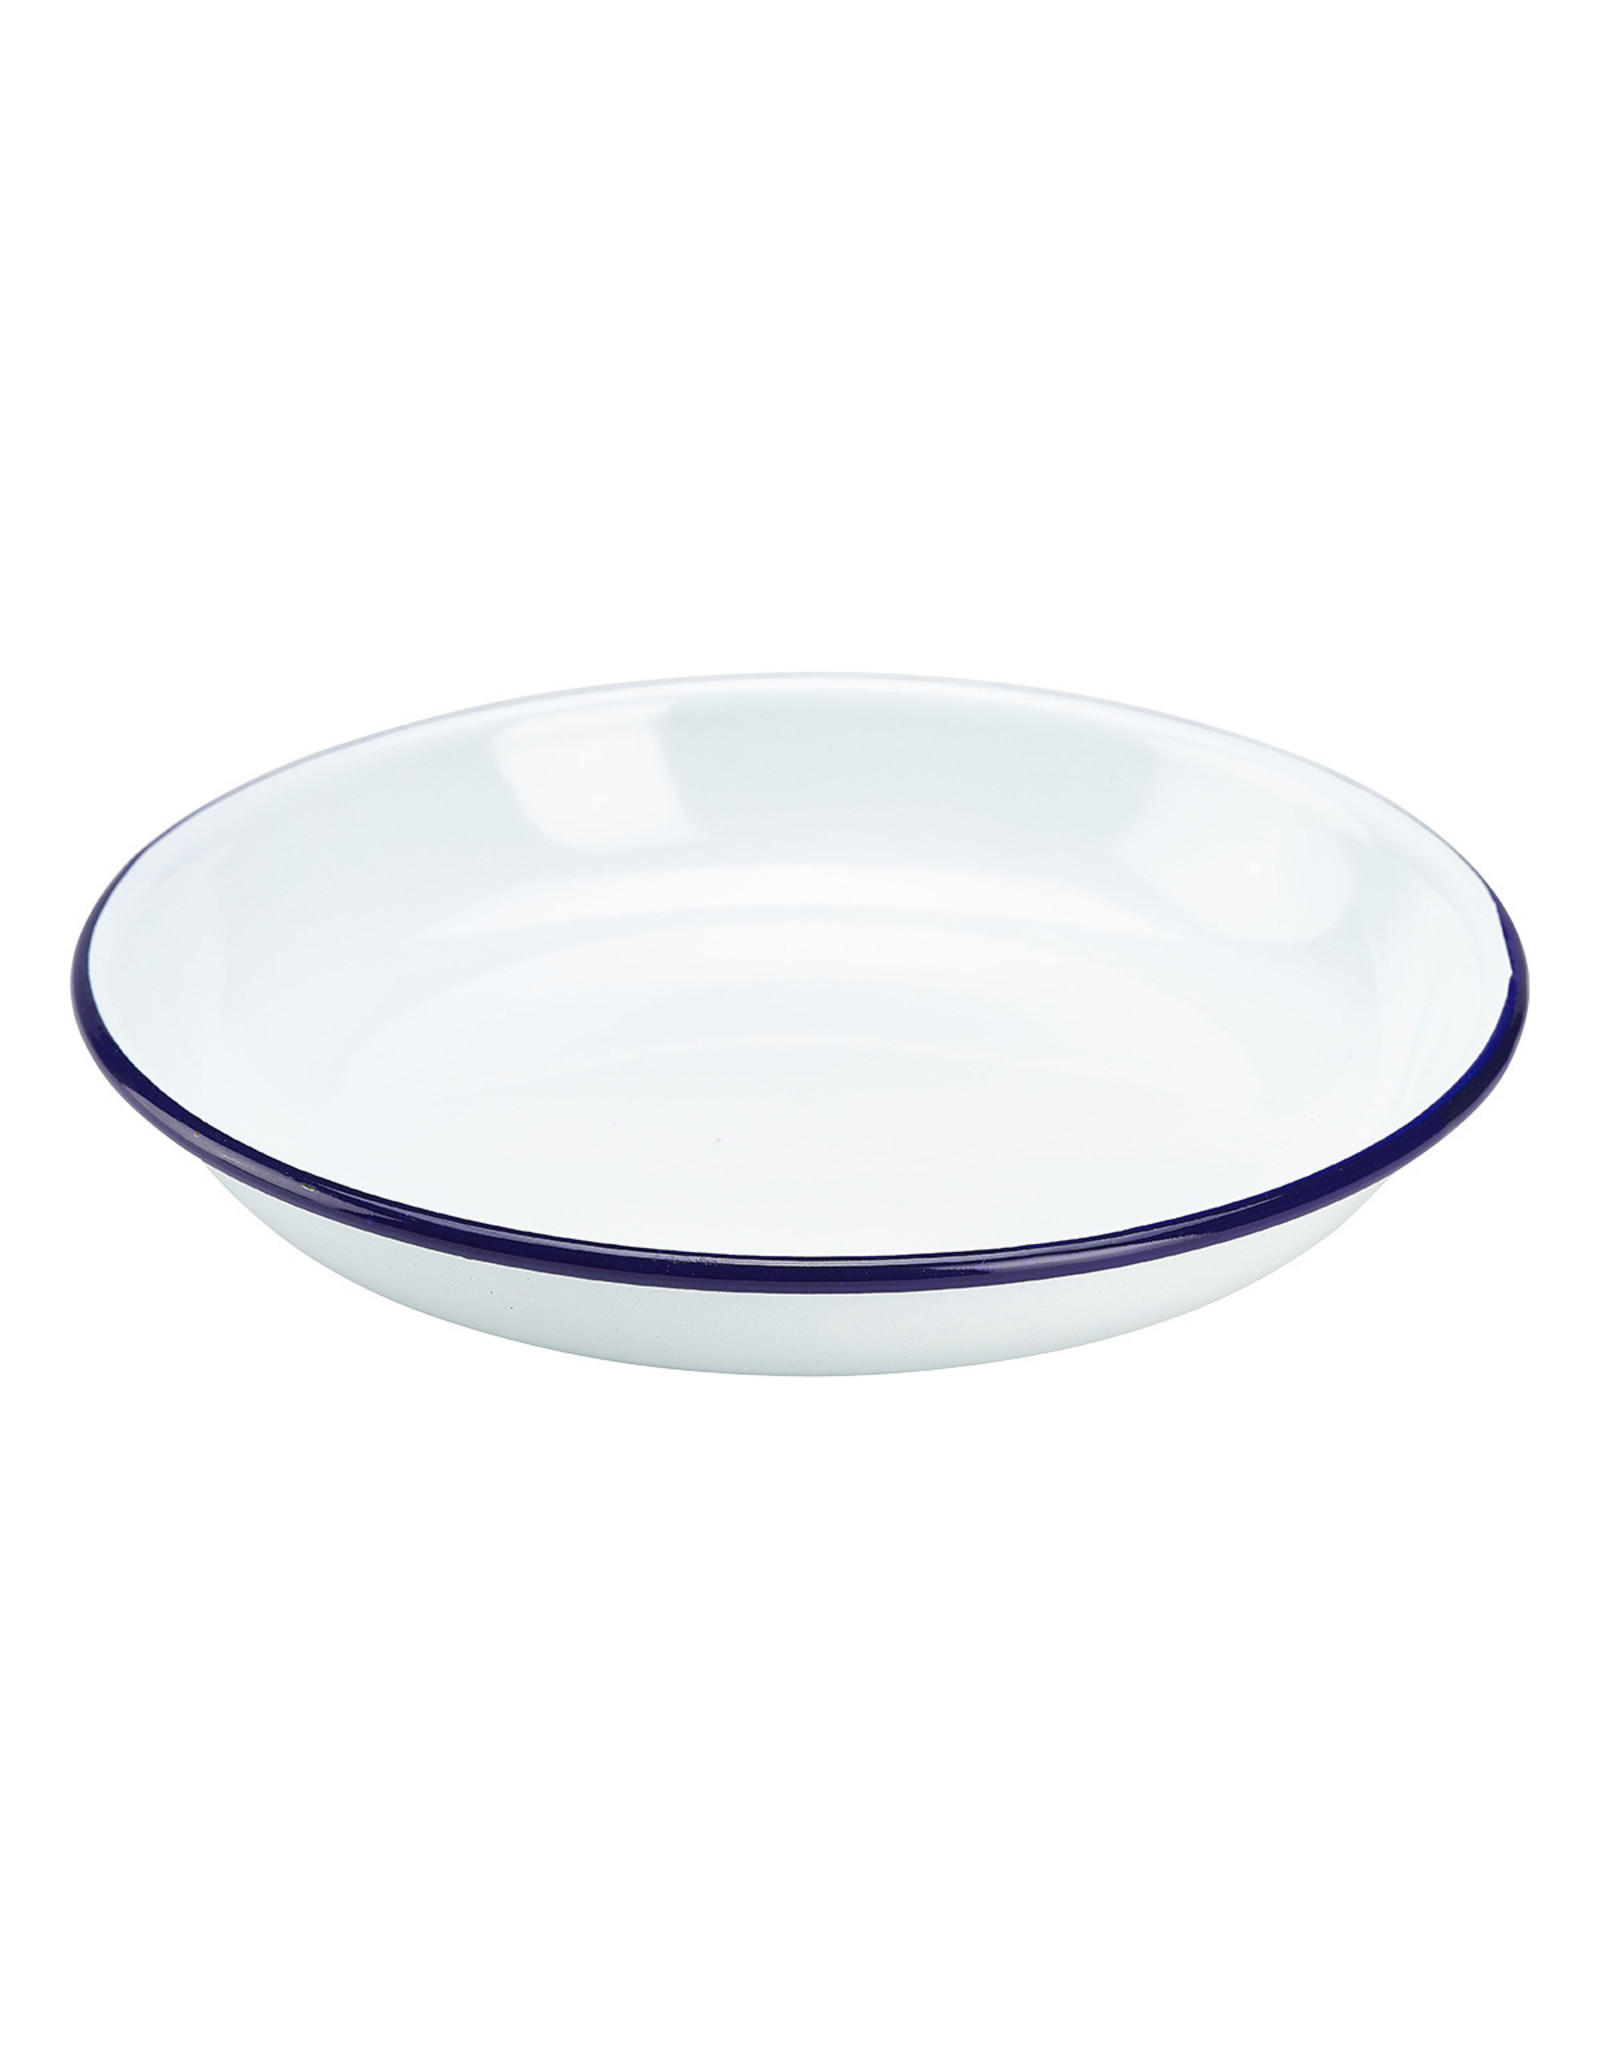 Stylepoint Enamel pasta plate with blue rim 20 cm